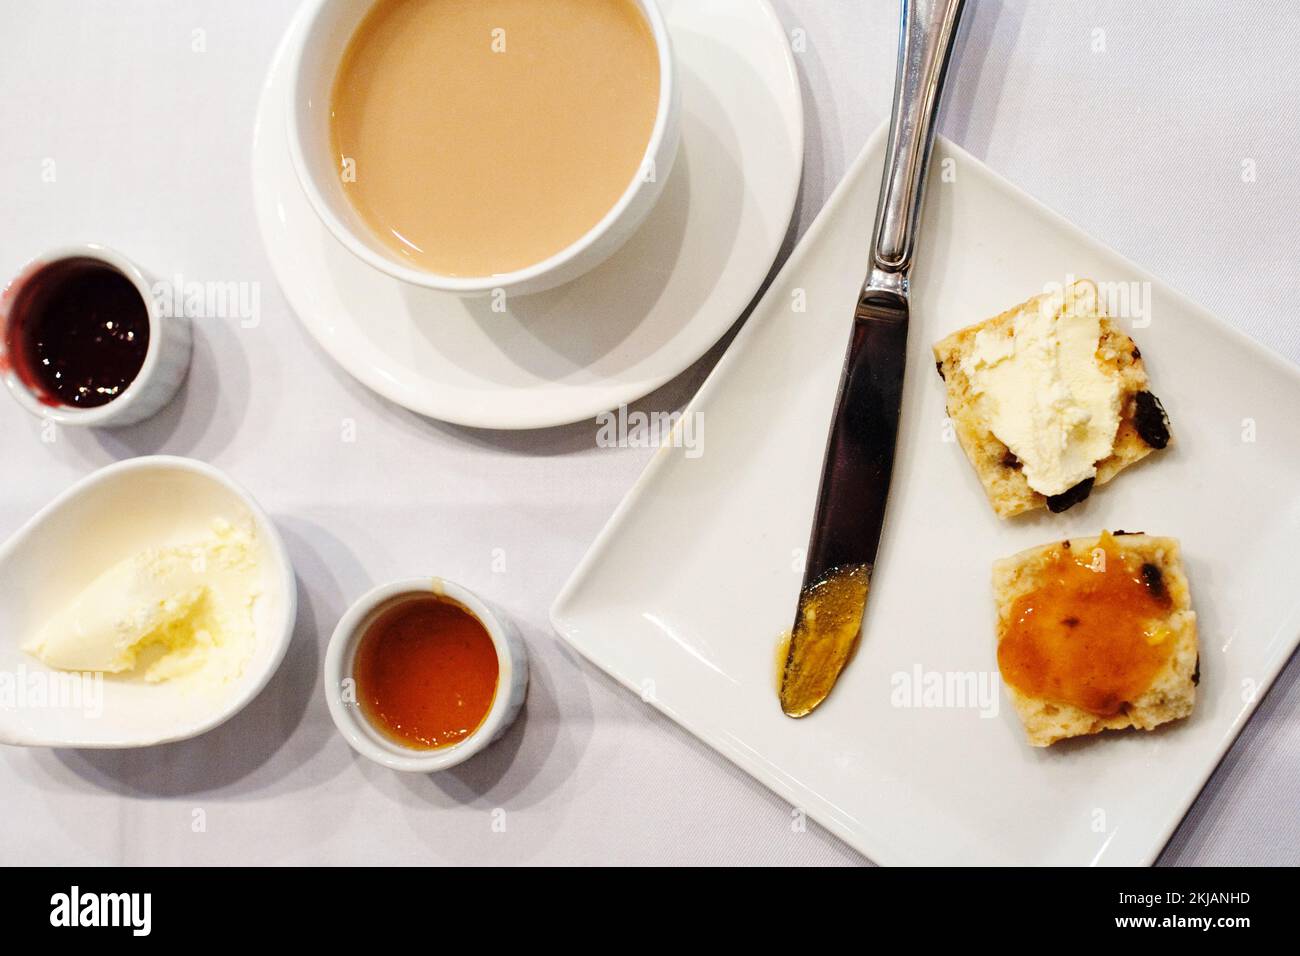 Tea and a raisin scone, served with a choice of jam and spread with clotted cream, at high tea in Hong Kong. Stock Photo